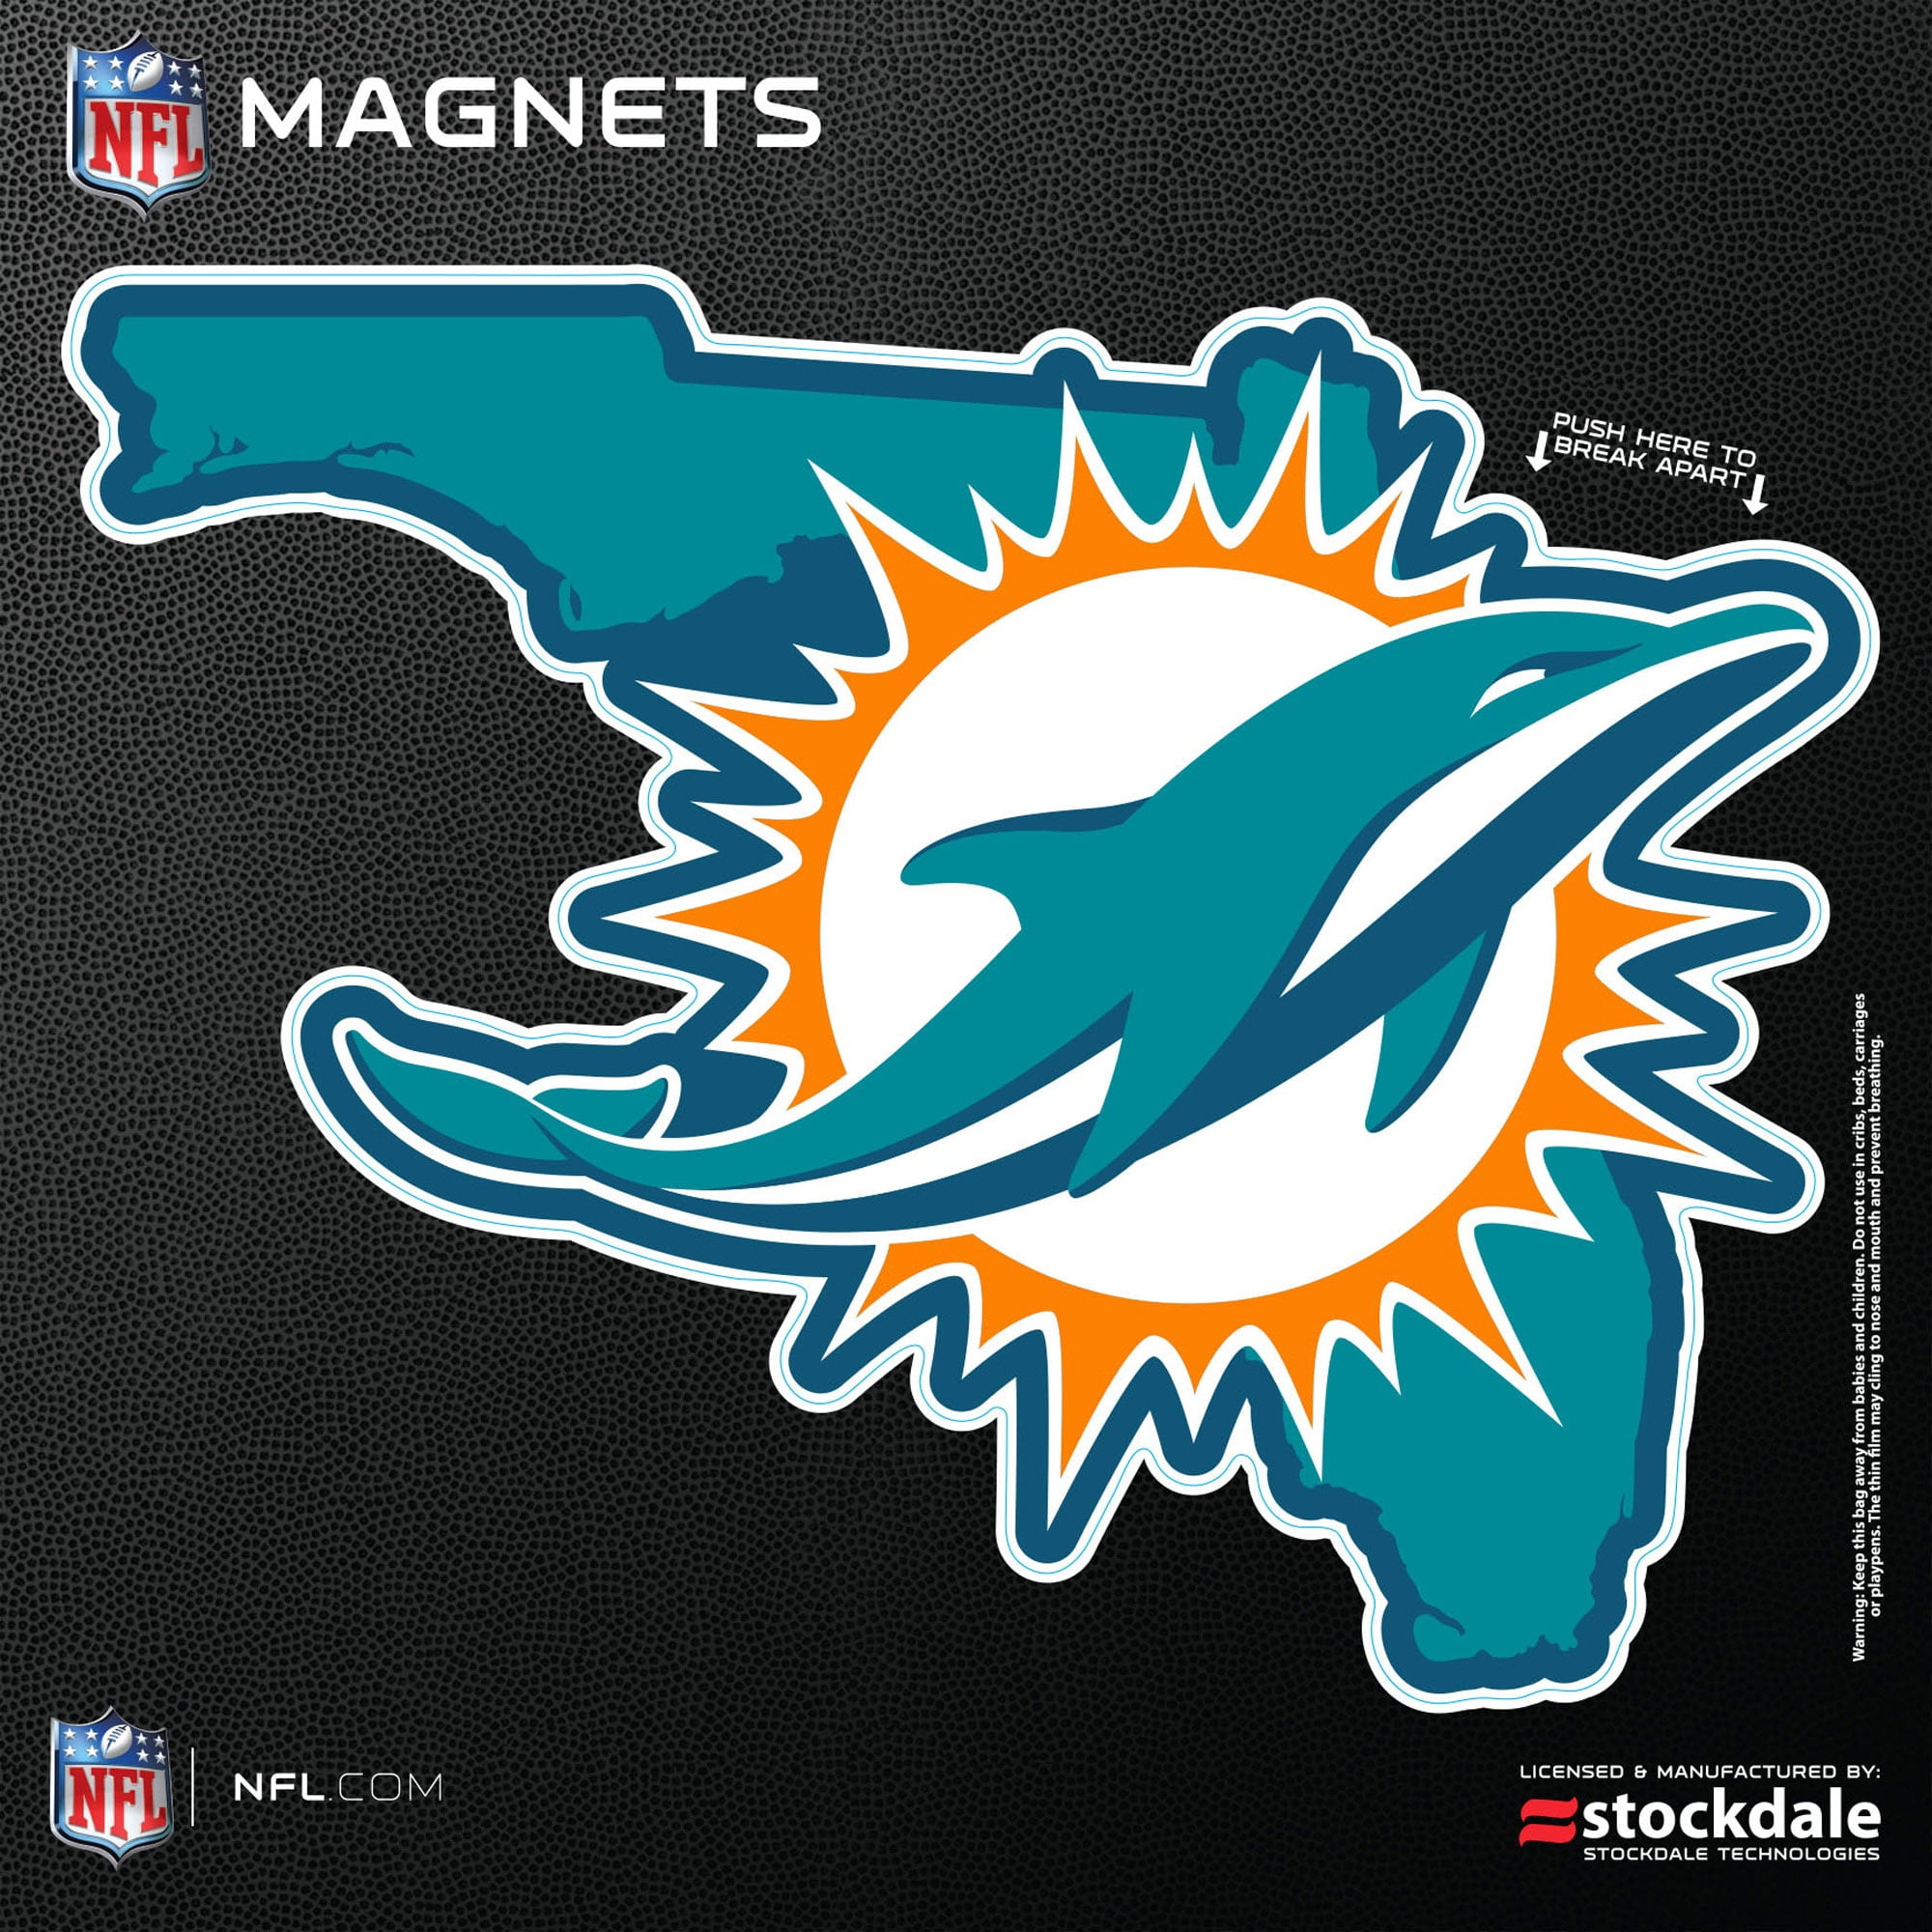 Metal Vanity License Plate Tag Cover Miami Dolphins Football Team 12" x 6" 